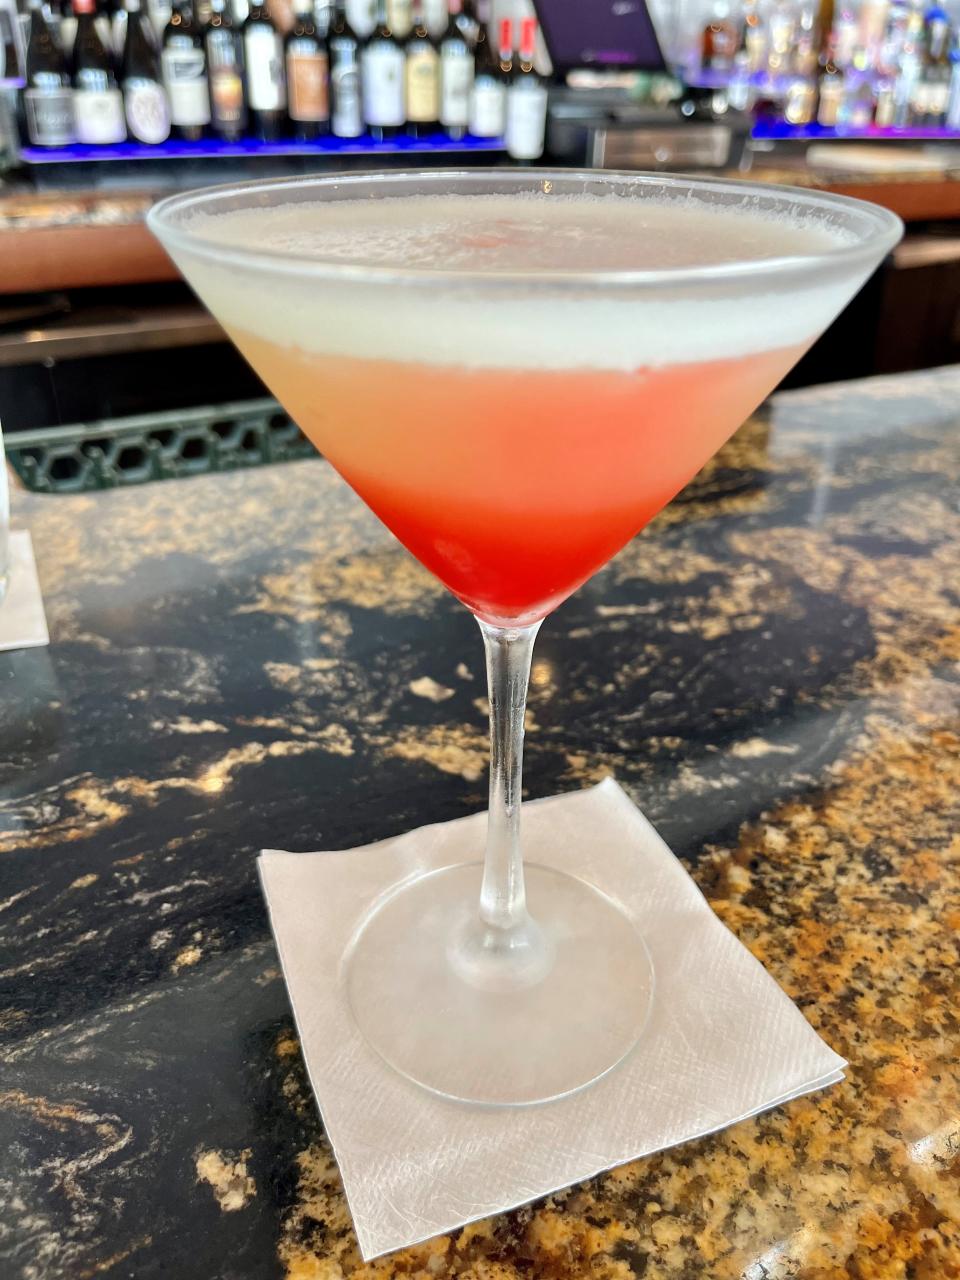 The upside down pineapple martini is one of a dozen signature martinis featured during happy hour at Fresh Catch Bistro on Fort Myers Beach.